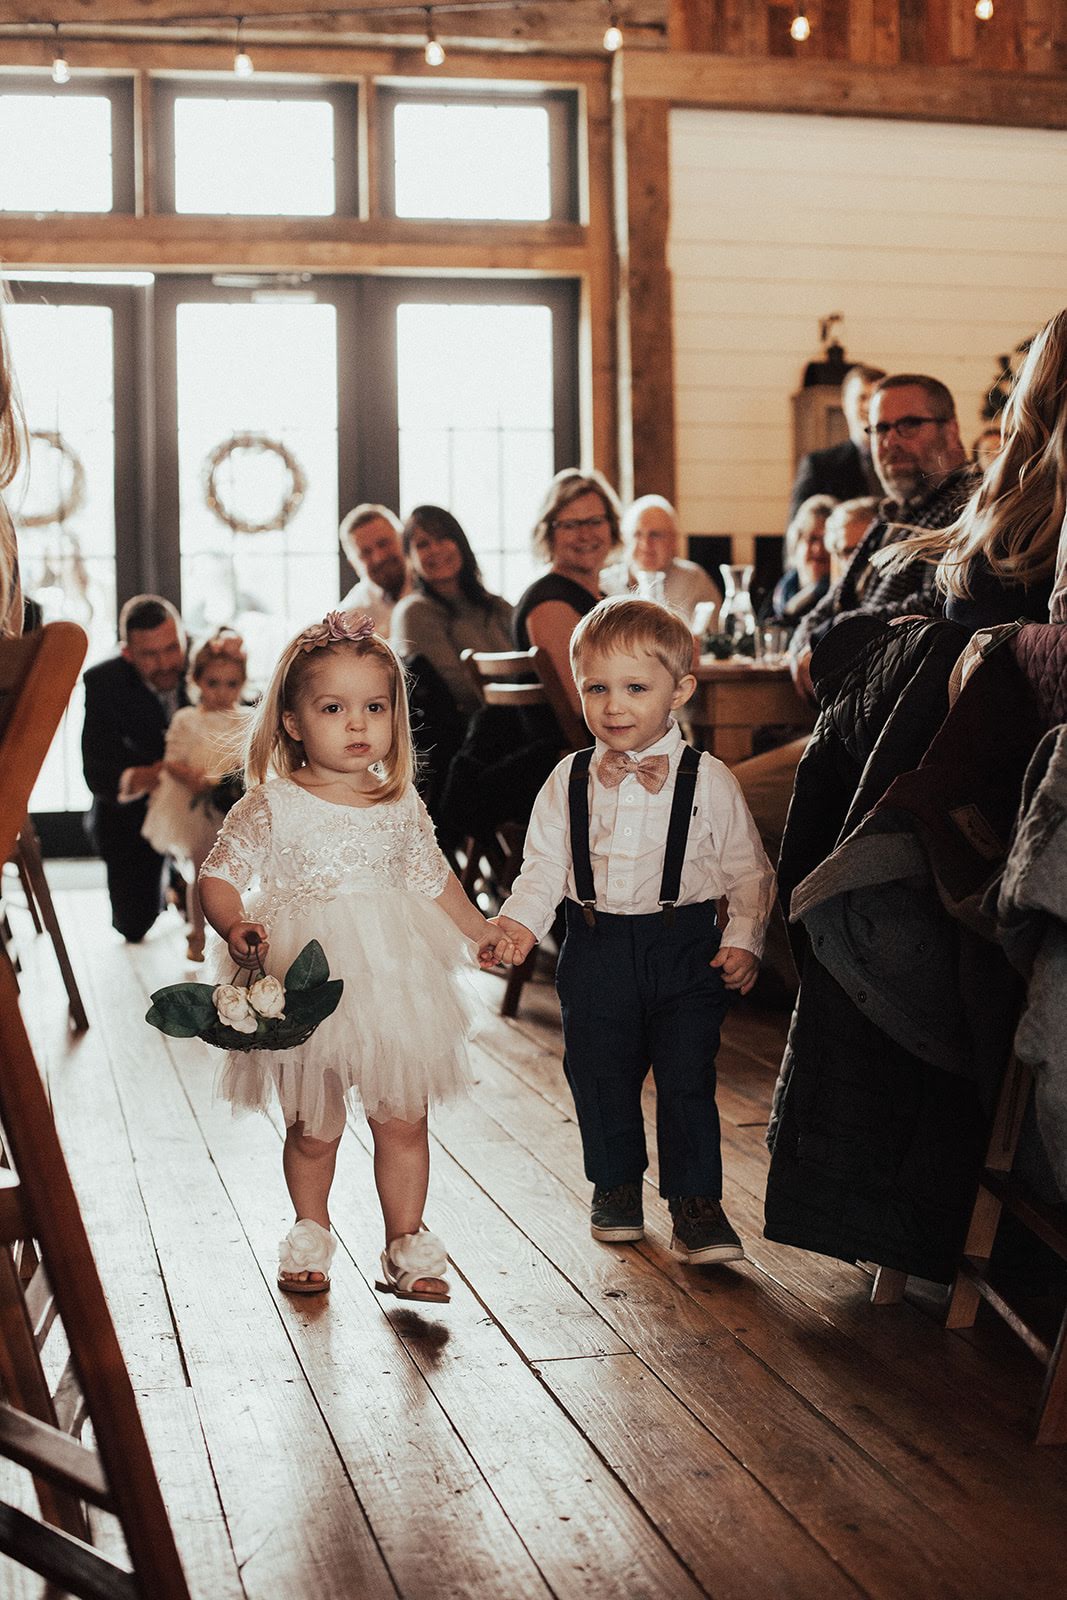 How cute are these little ones?! They did such a great job walking down the aisle!